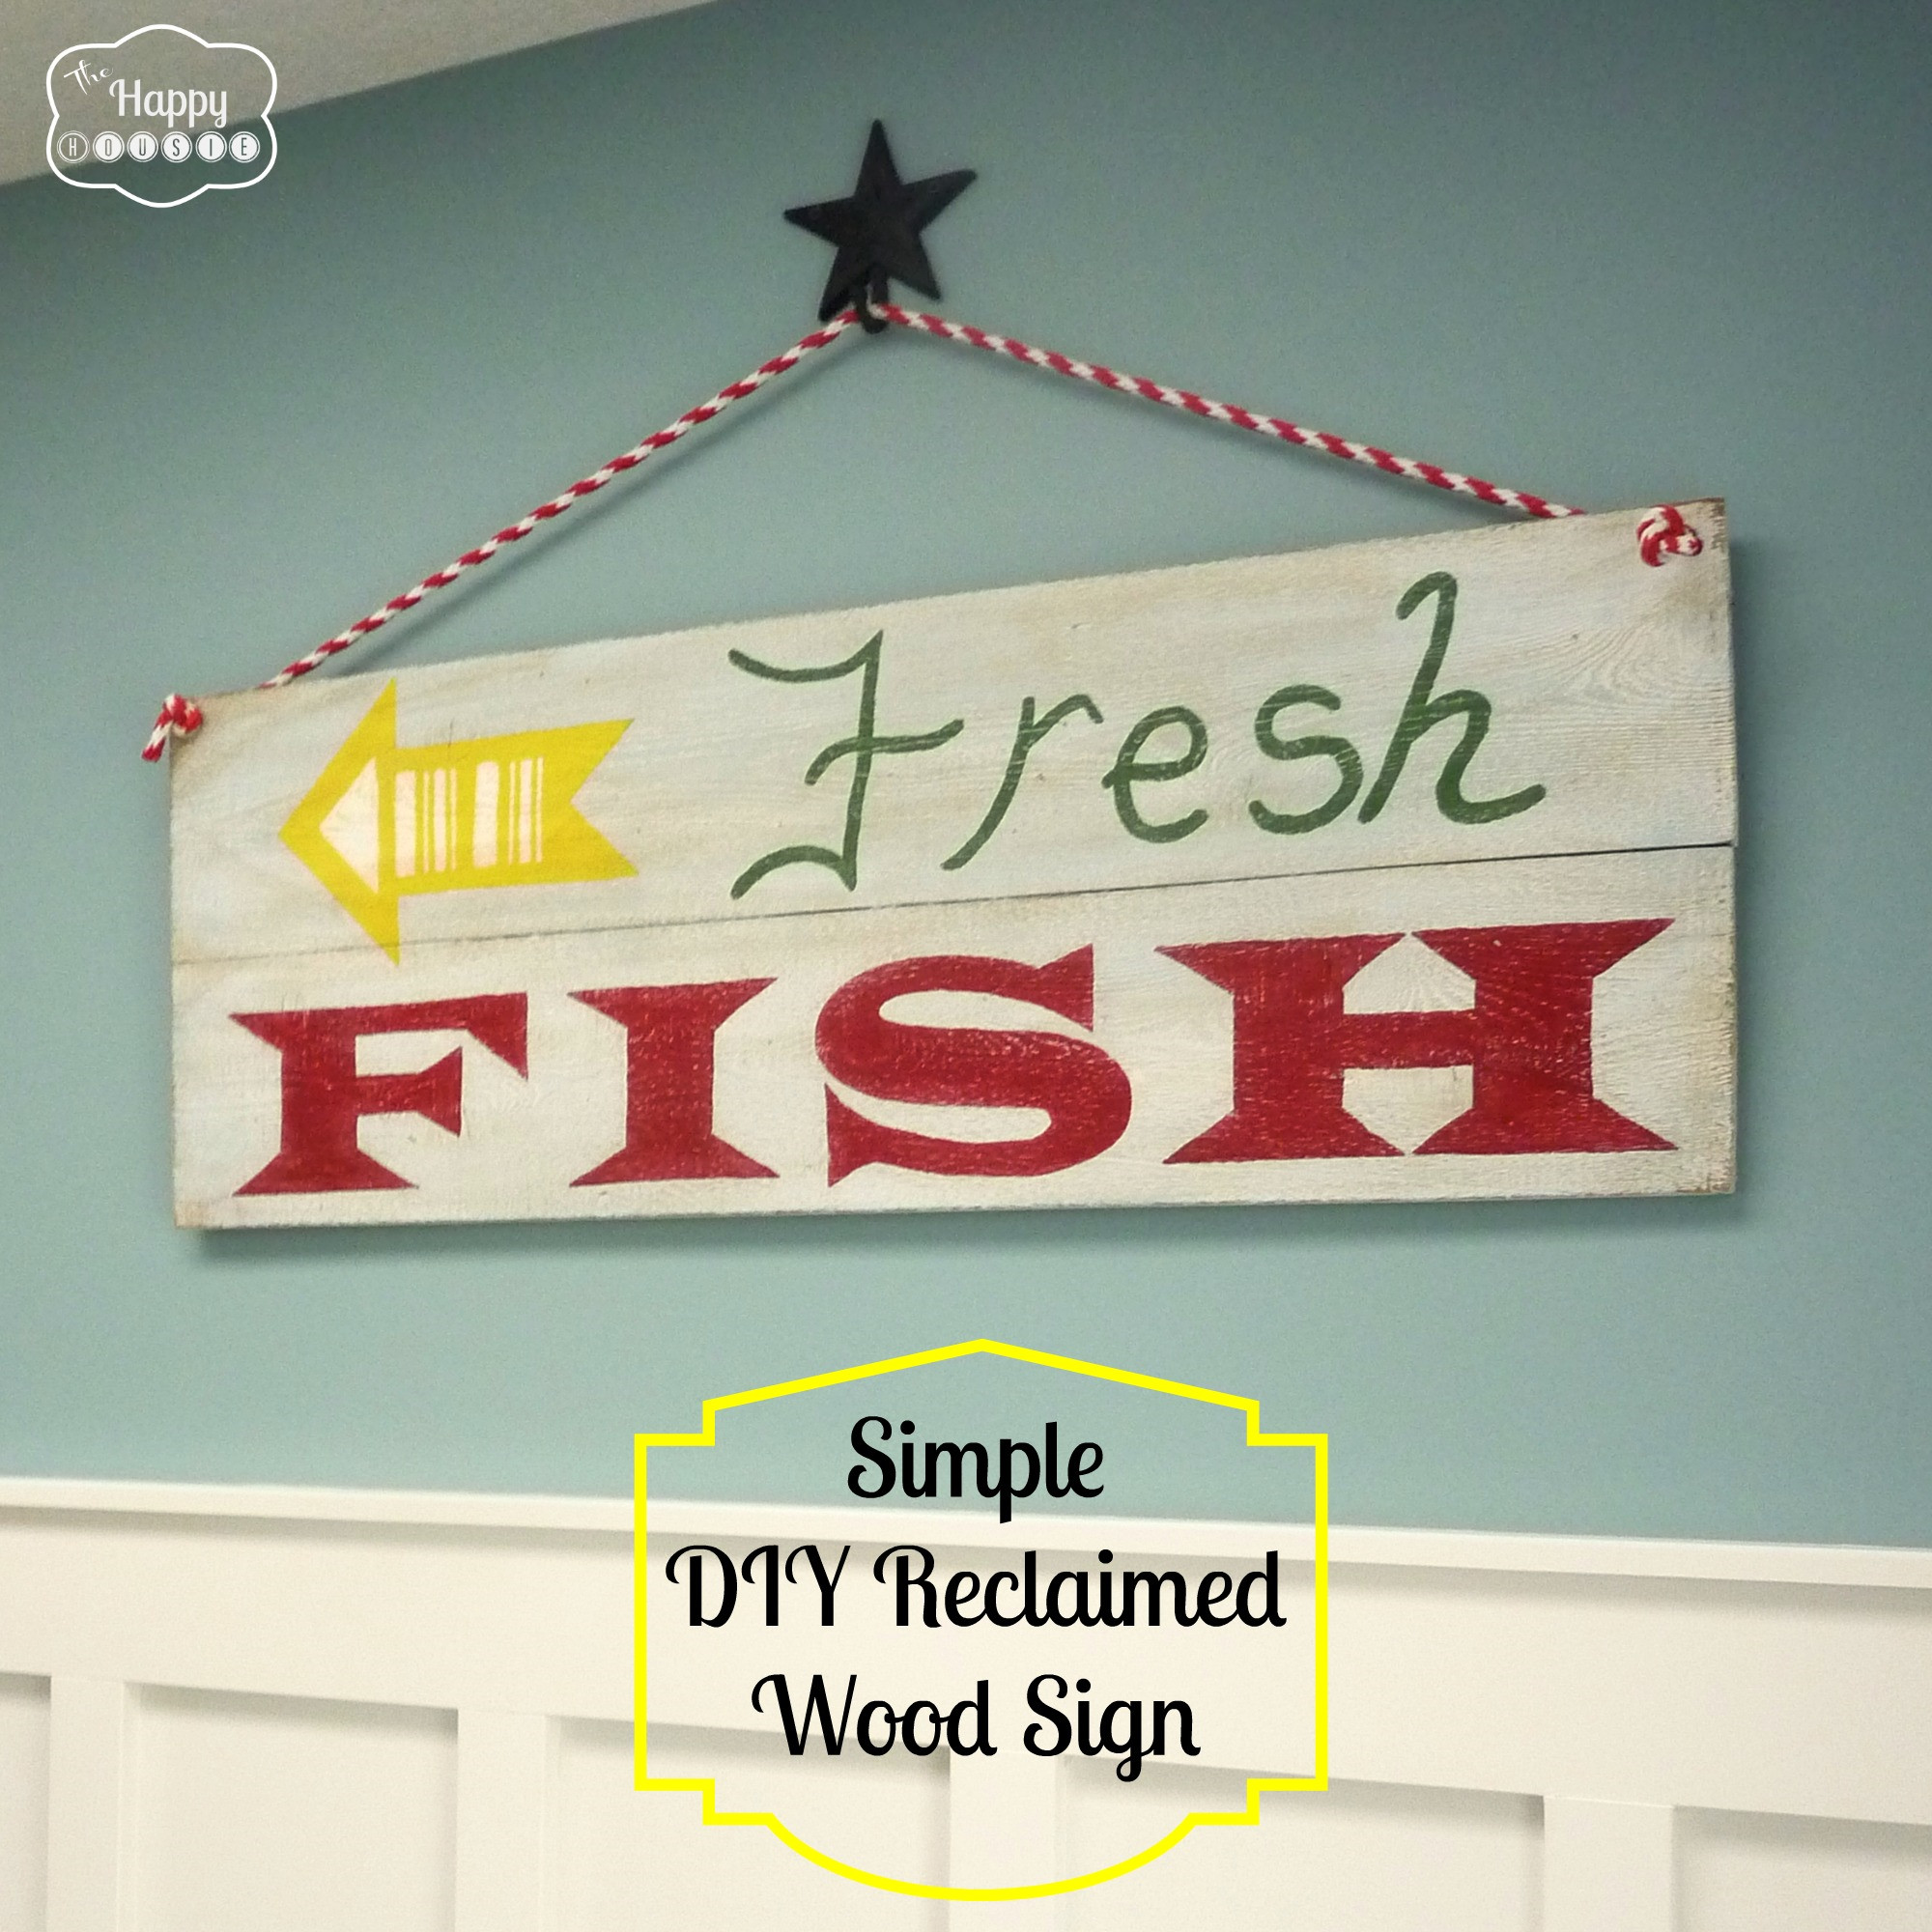 Reclaimed Wood Signs DIY
 Simple DIY Reclaimed Wood Sign for the Entry Hall The